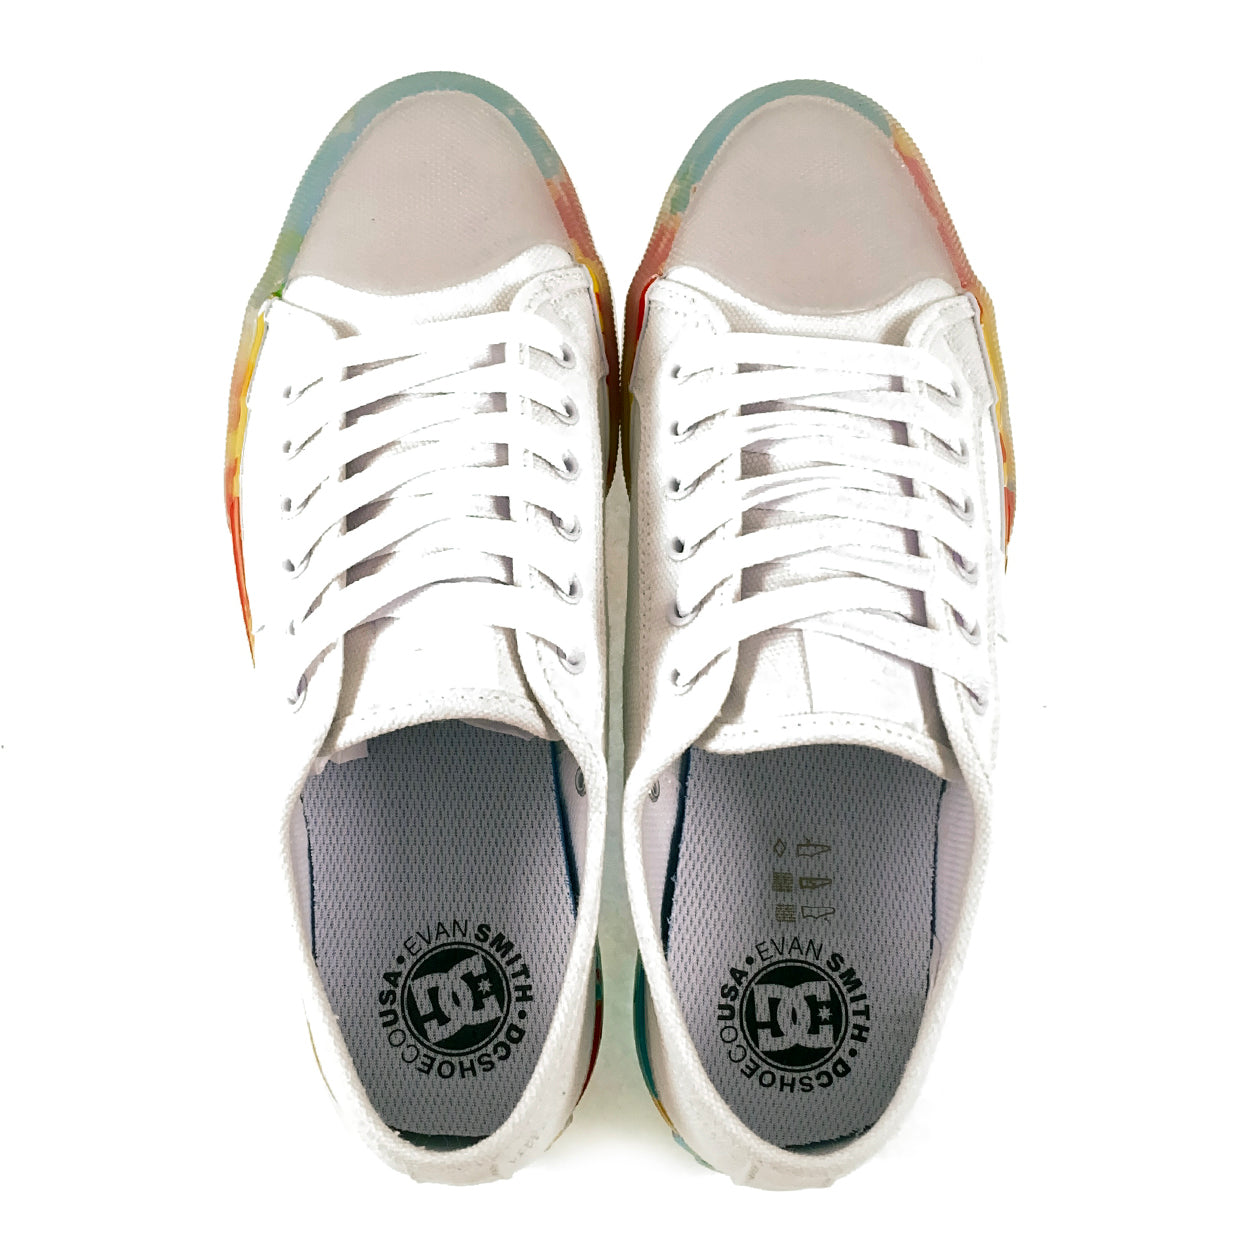 DC Shoes Manual RT S X Evan Smith Skate Shoes - Prime Delux Store